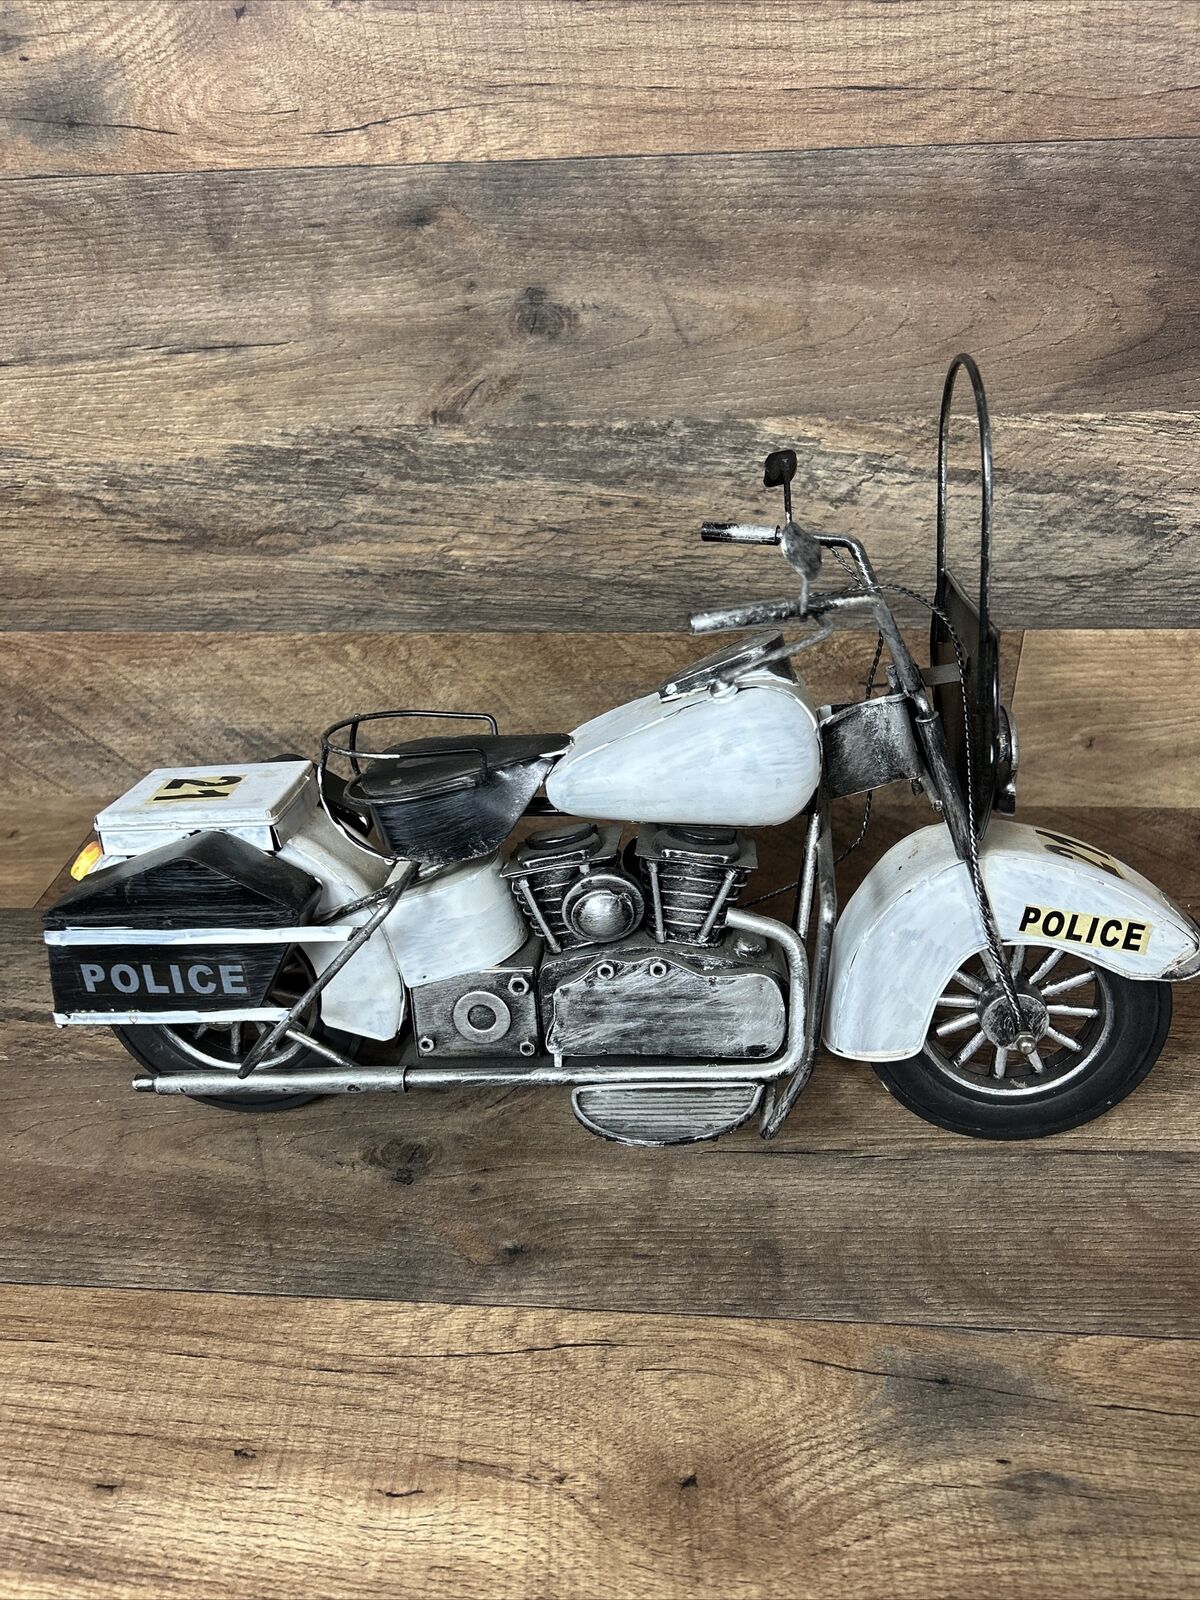 Harley Davidson Police Policeman Motorcycle 21 Glide Replica Toy